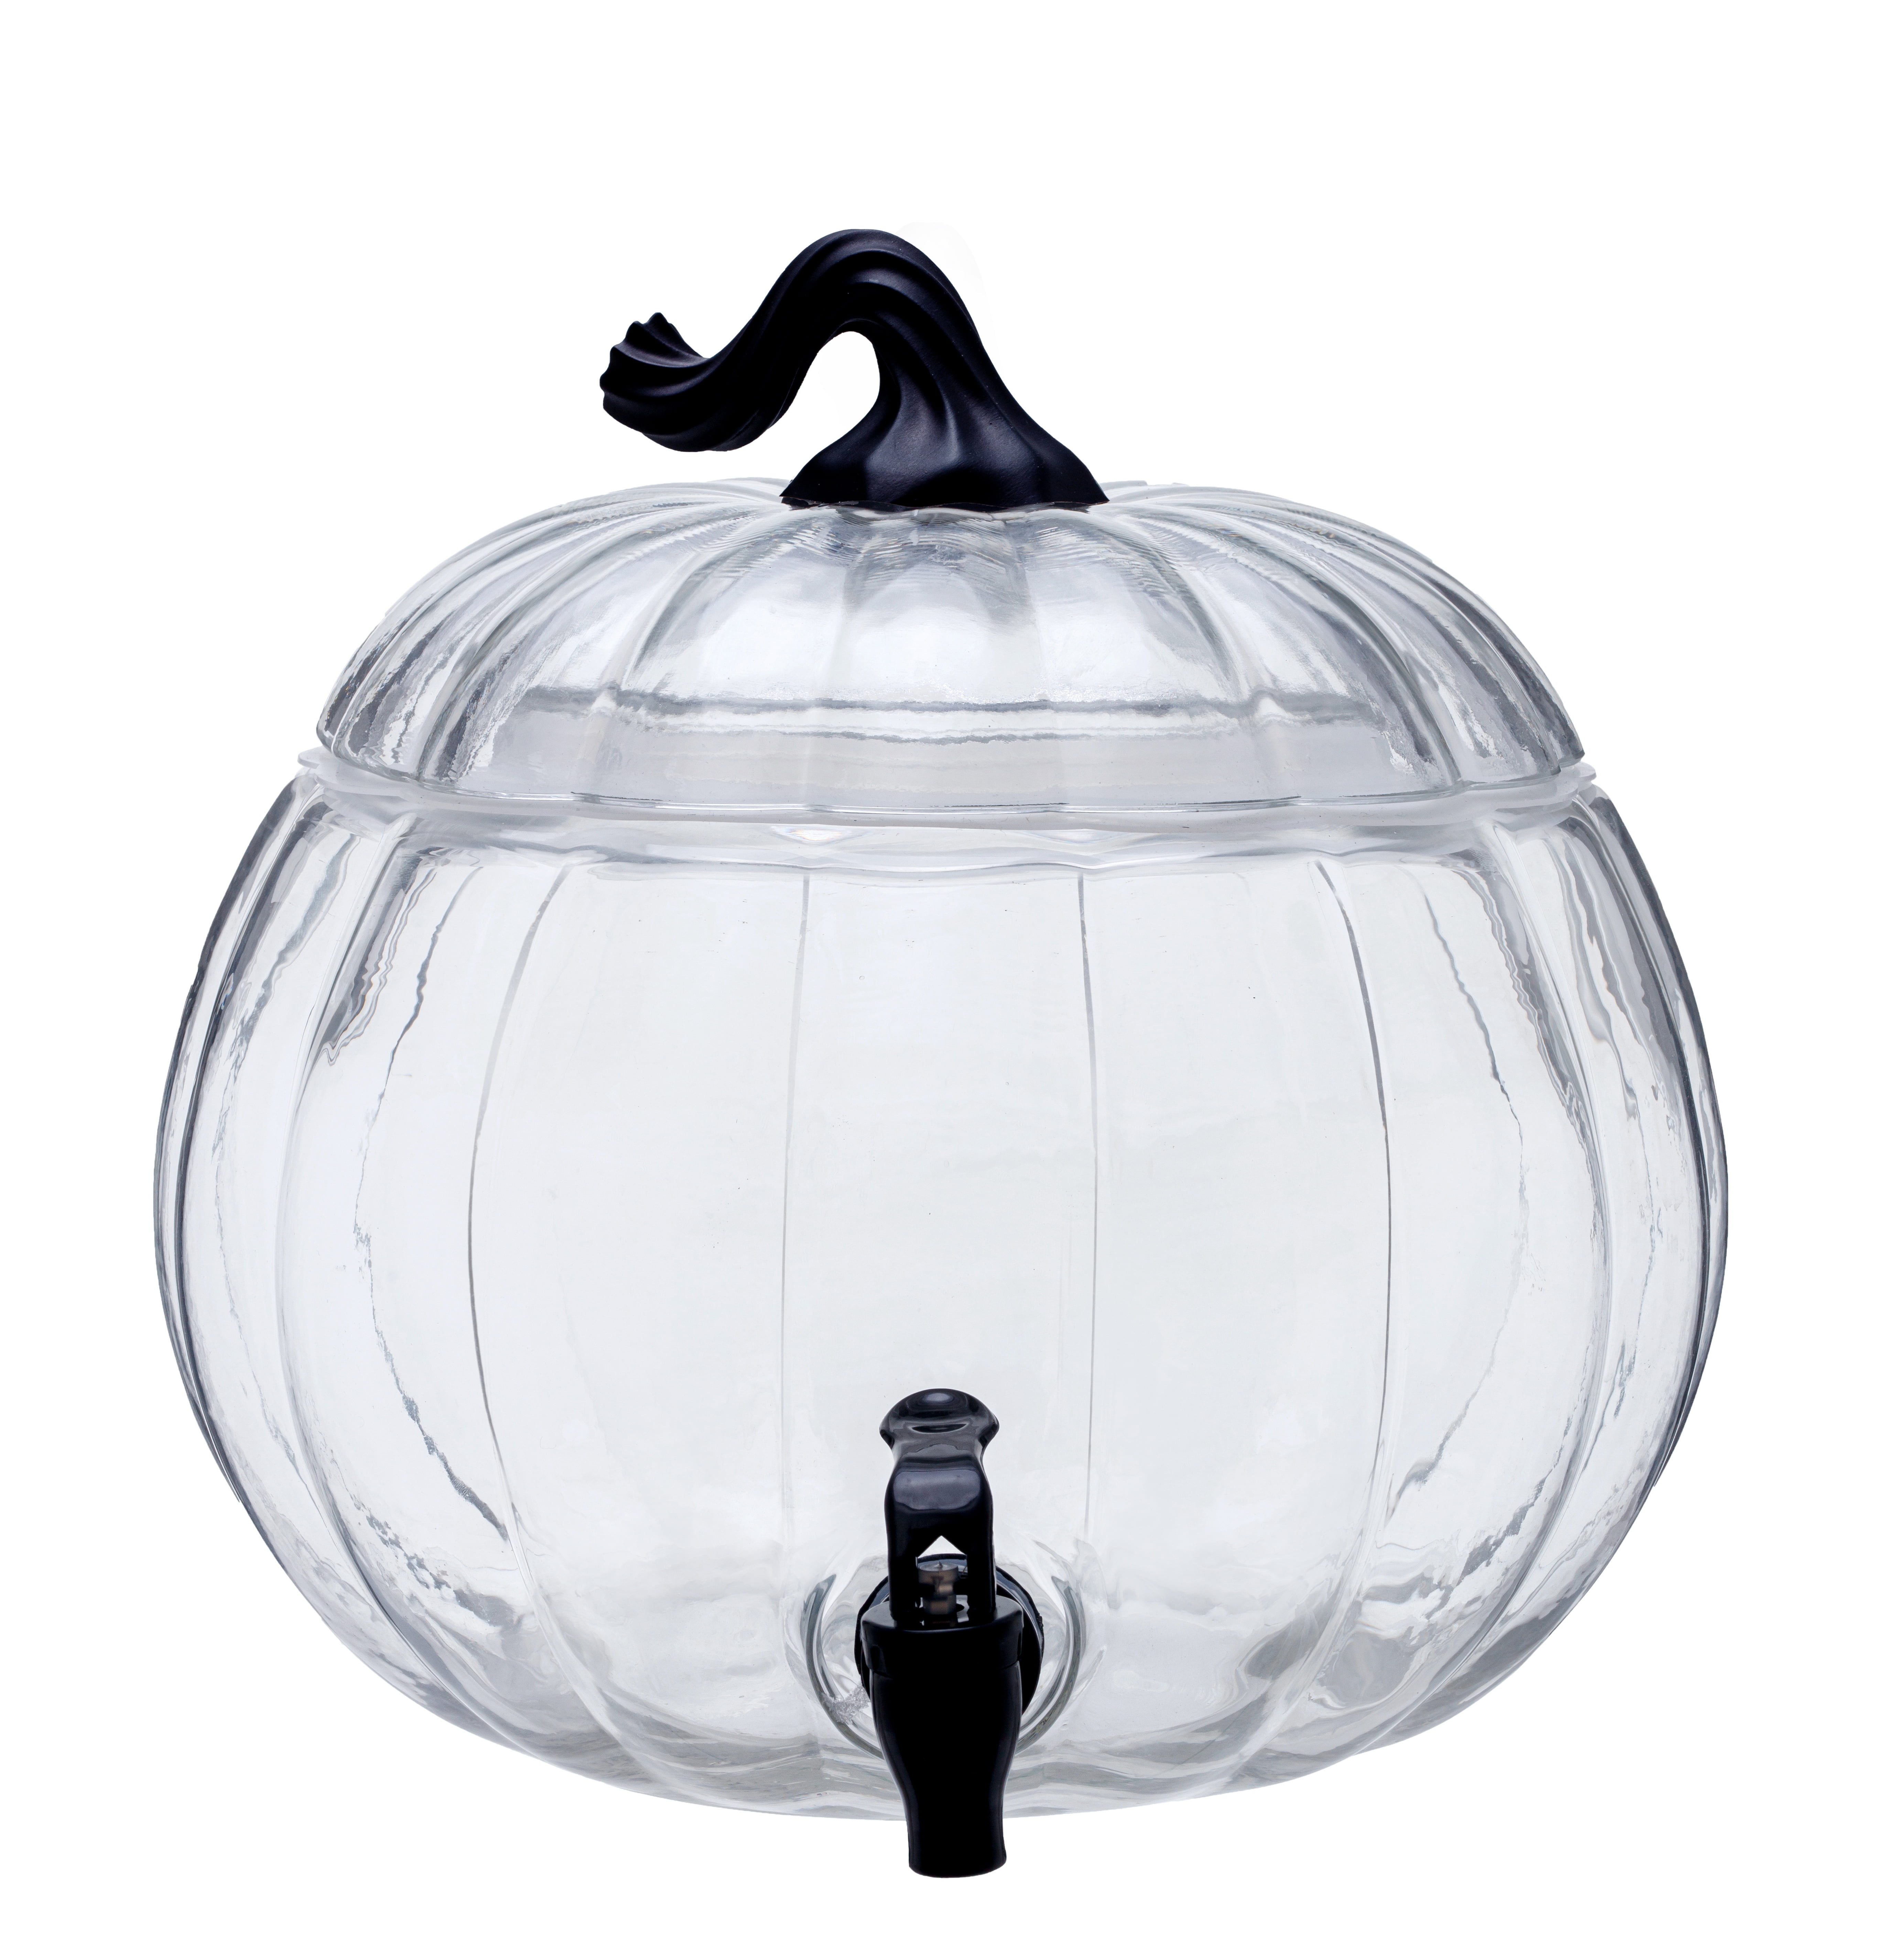 Spooky season is upin us! This cute glass cup is now available on my t